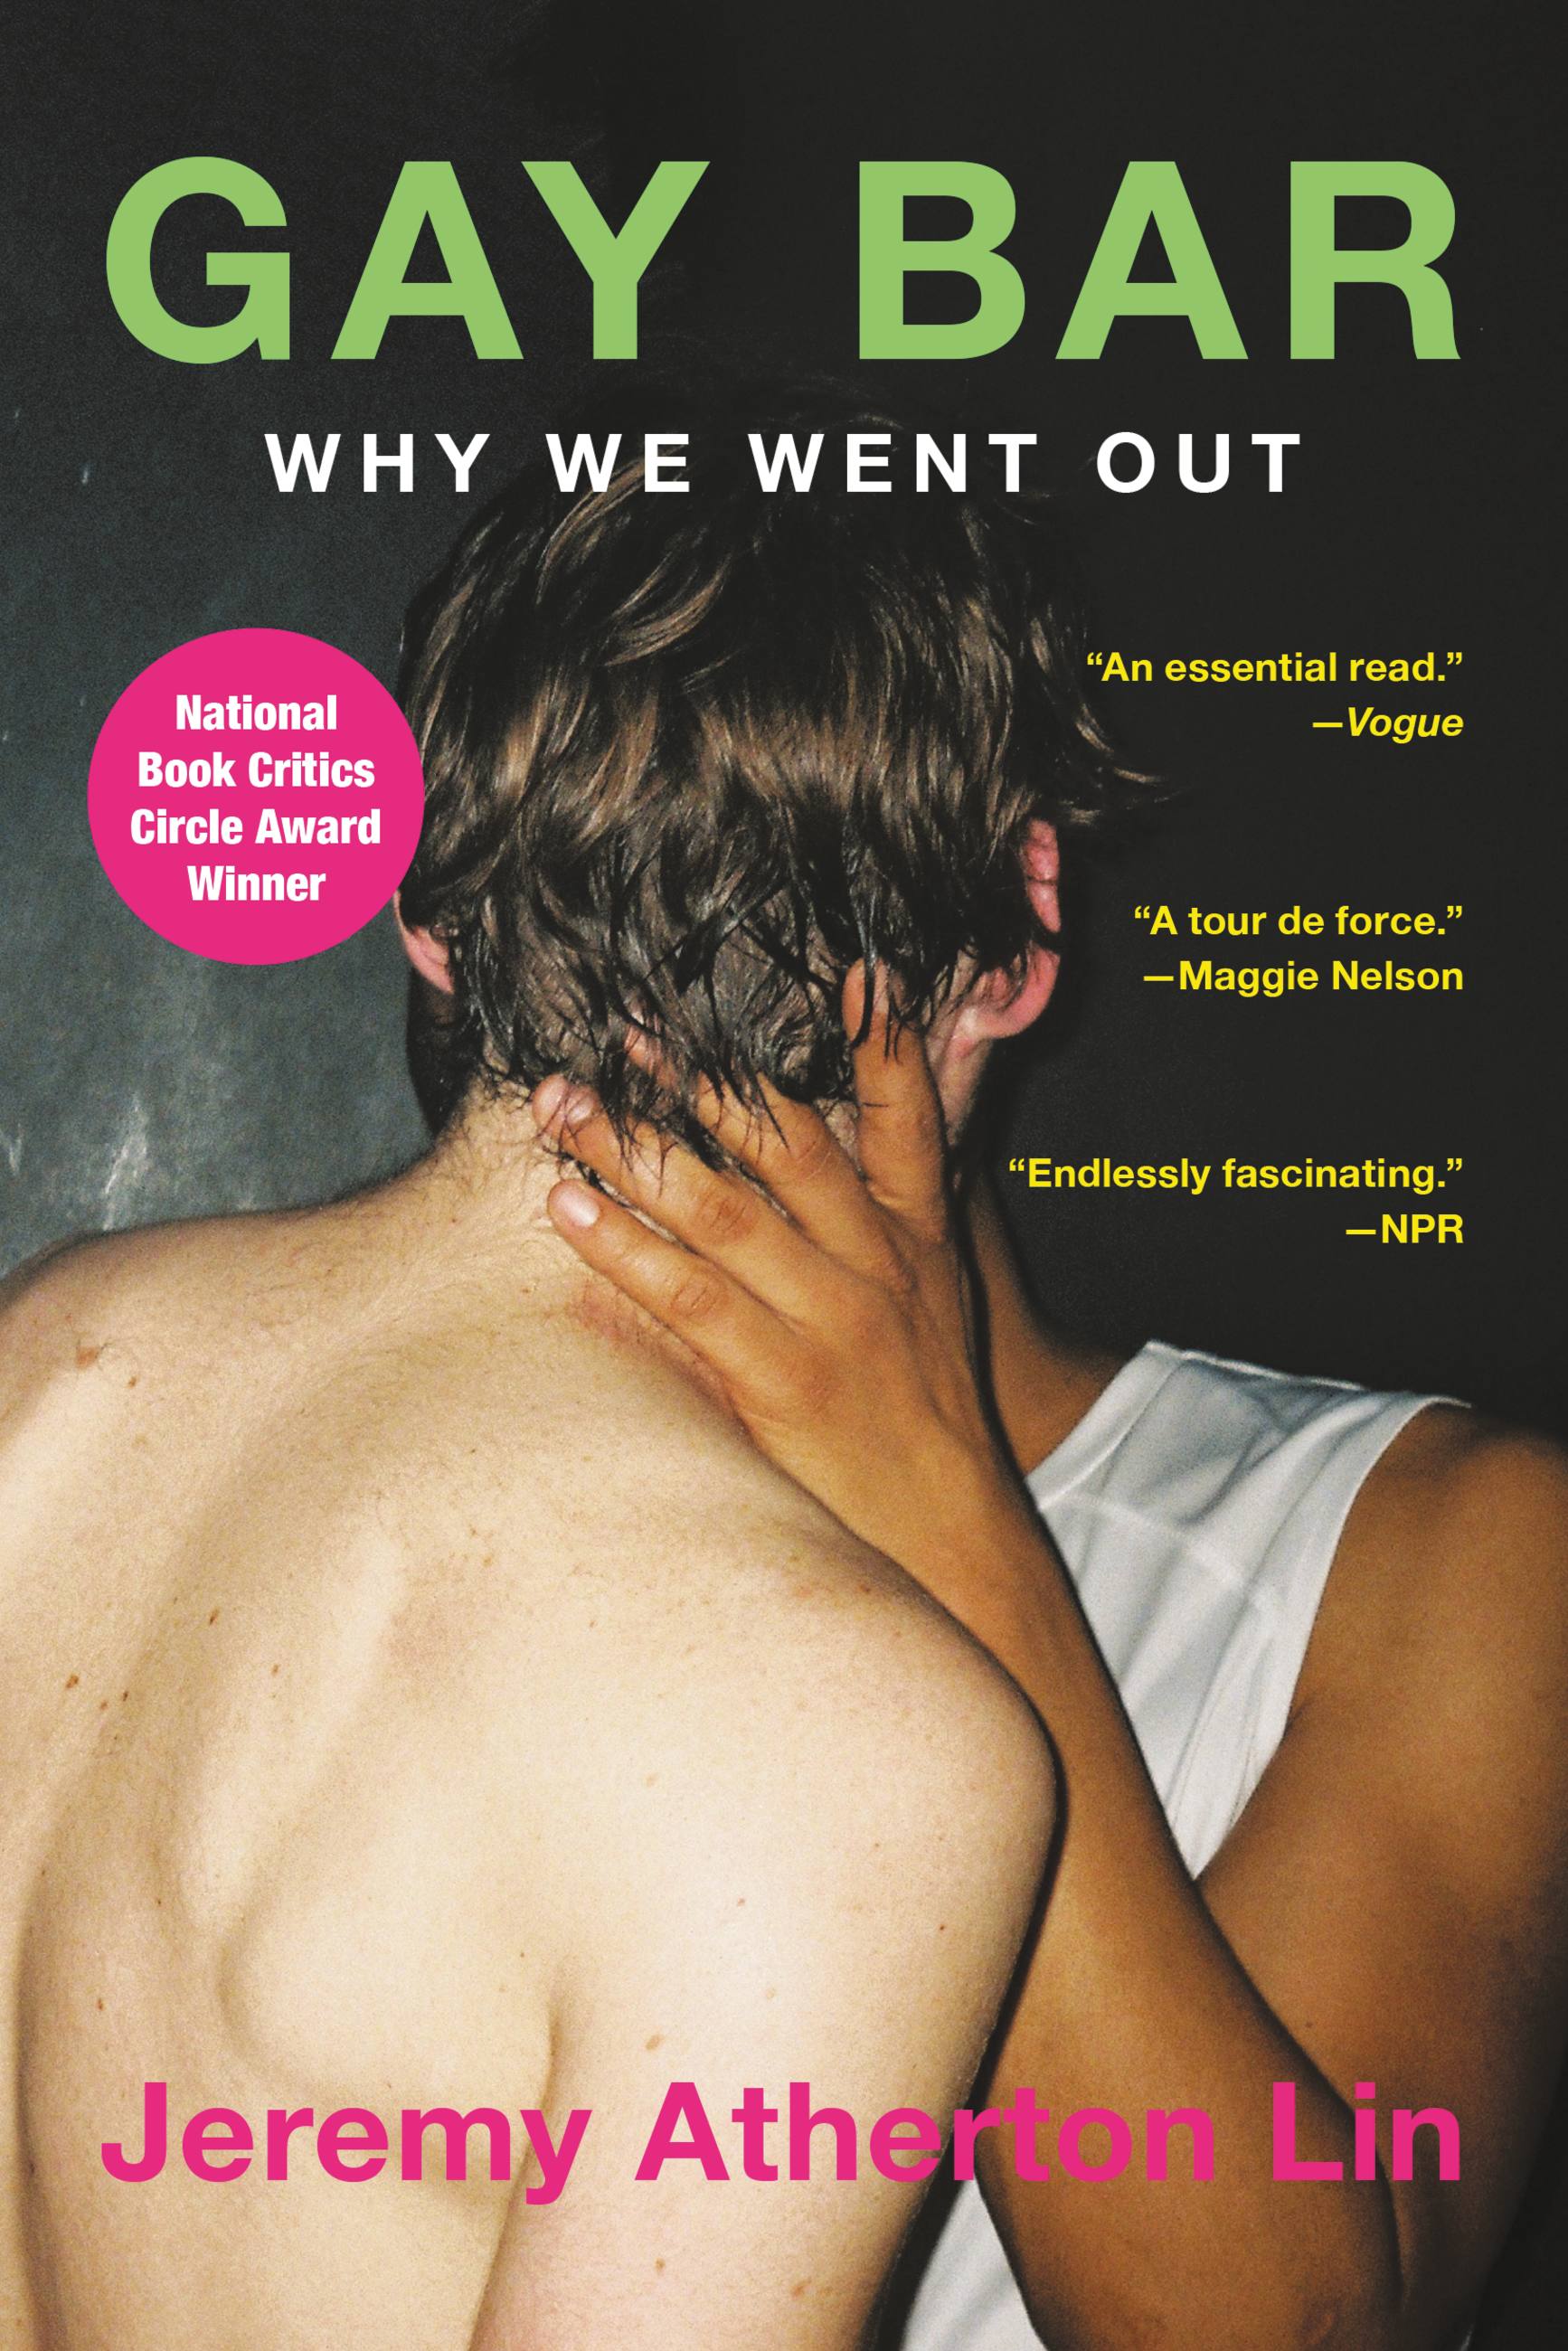 Gay Bar by Jeremy Atherton Lin Hachette Book Group